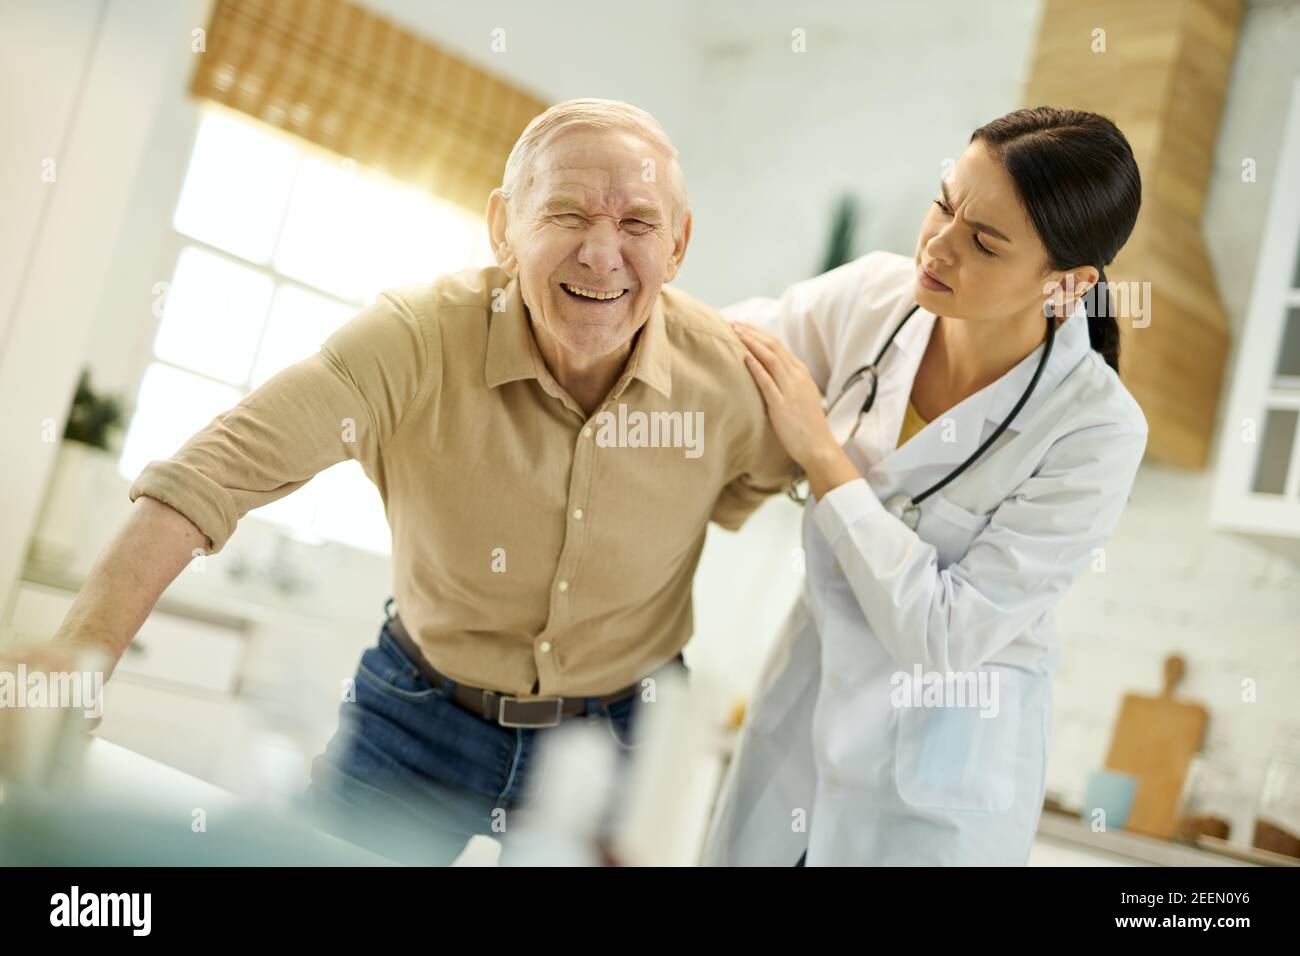 Concerned female doctor furrowing her brow while helping senior man to get up from the chair Stock Photo